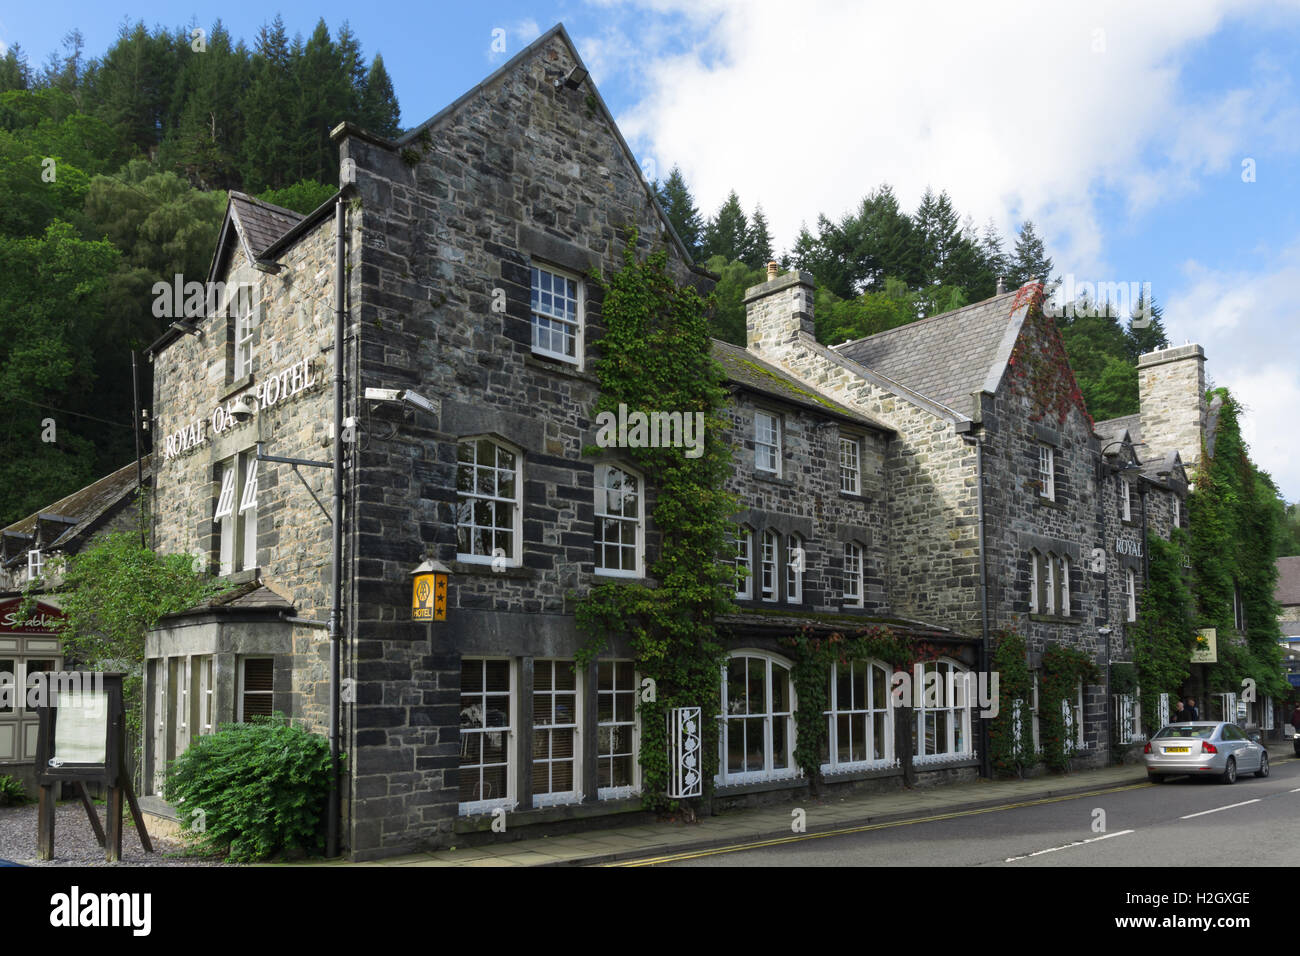 The Royal Oak Hotel in Betws y Coed Wales a former Victorian coaching inn now a restaurant and provides accommodation to visitors Stock Photo